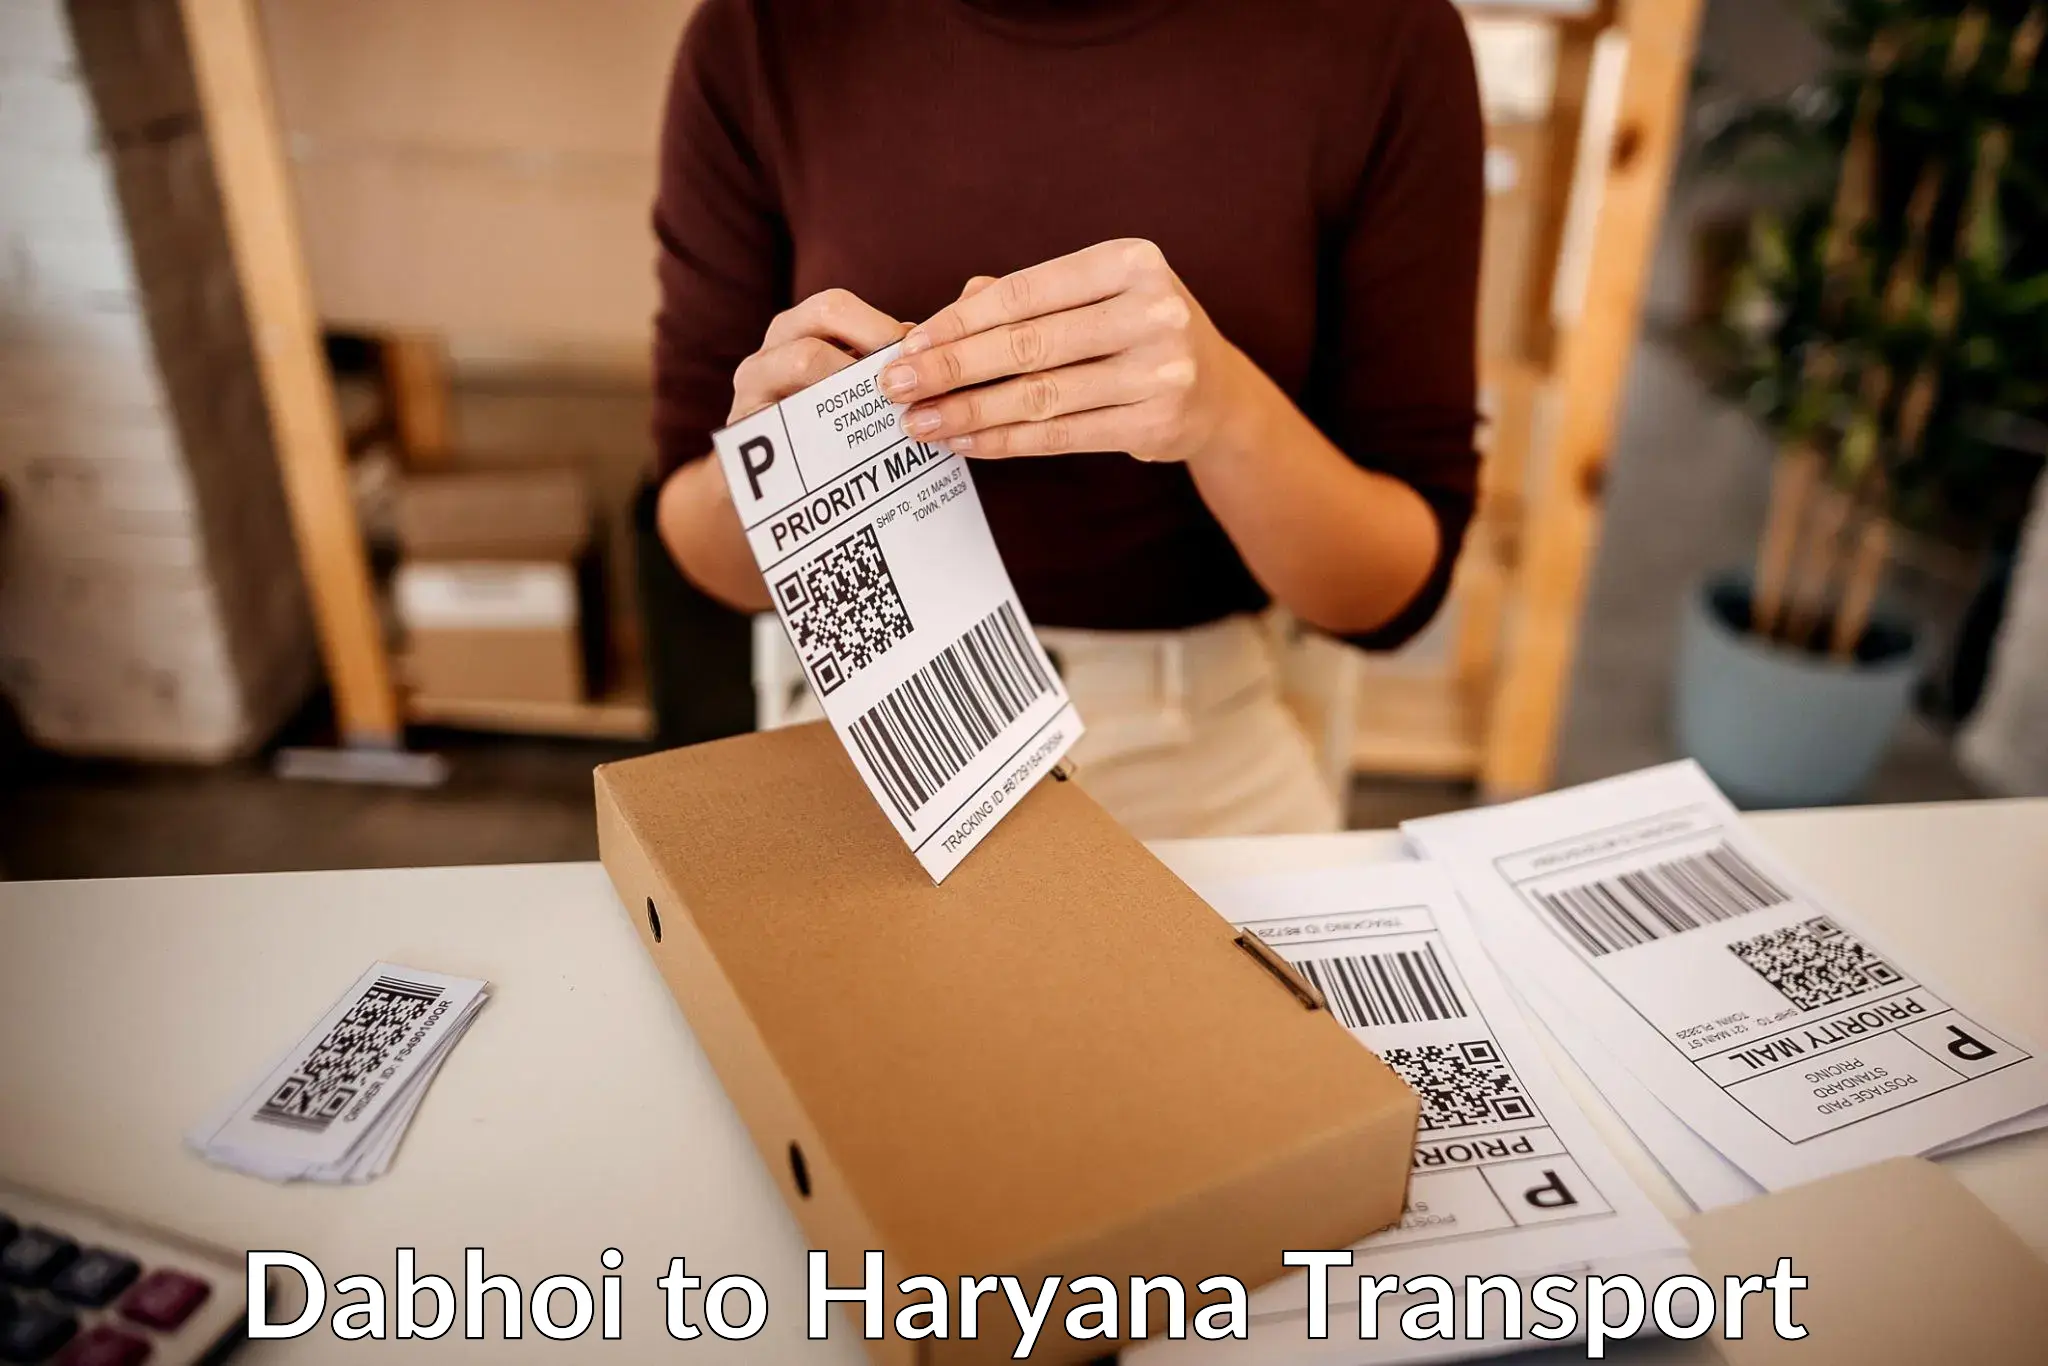 Daily parcel service transport Dabhoi to Sonipat